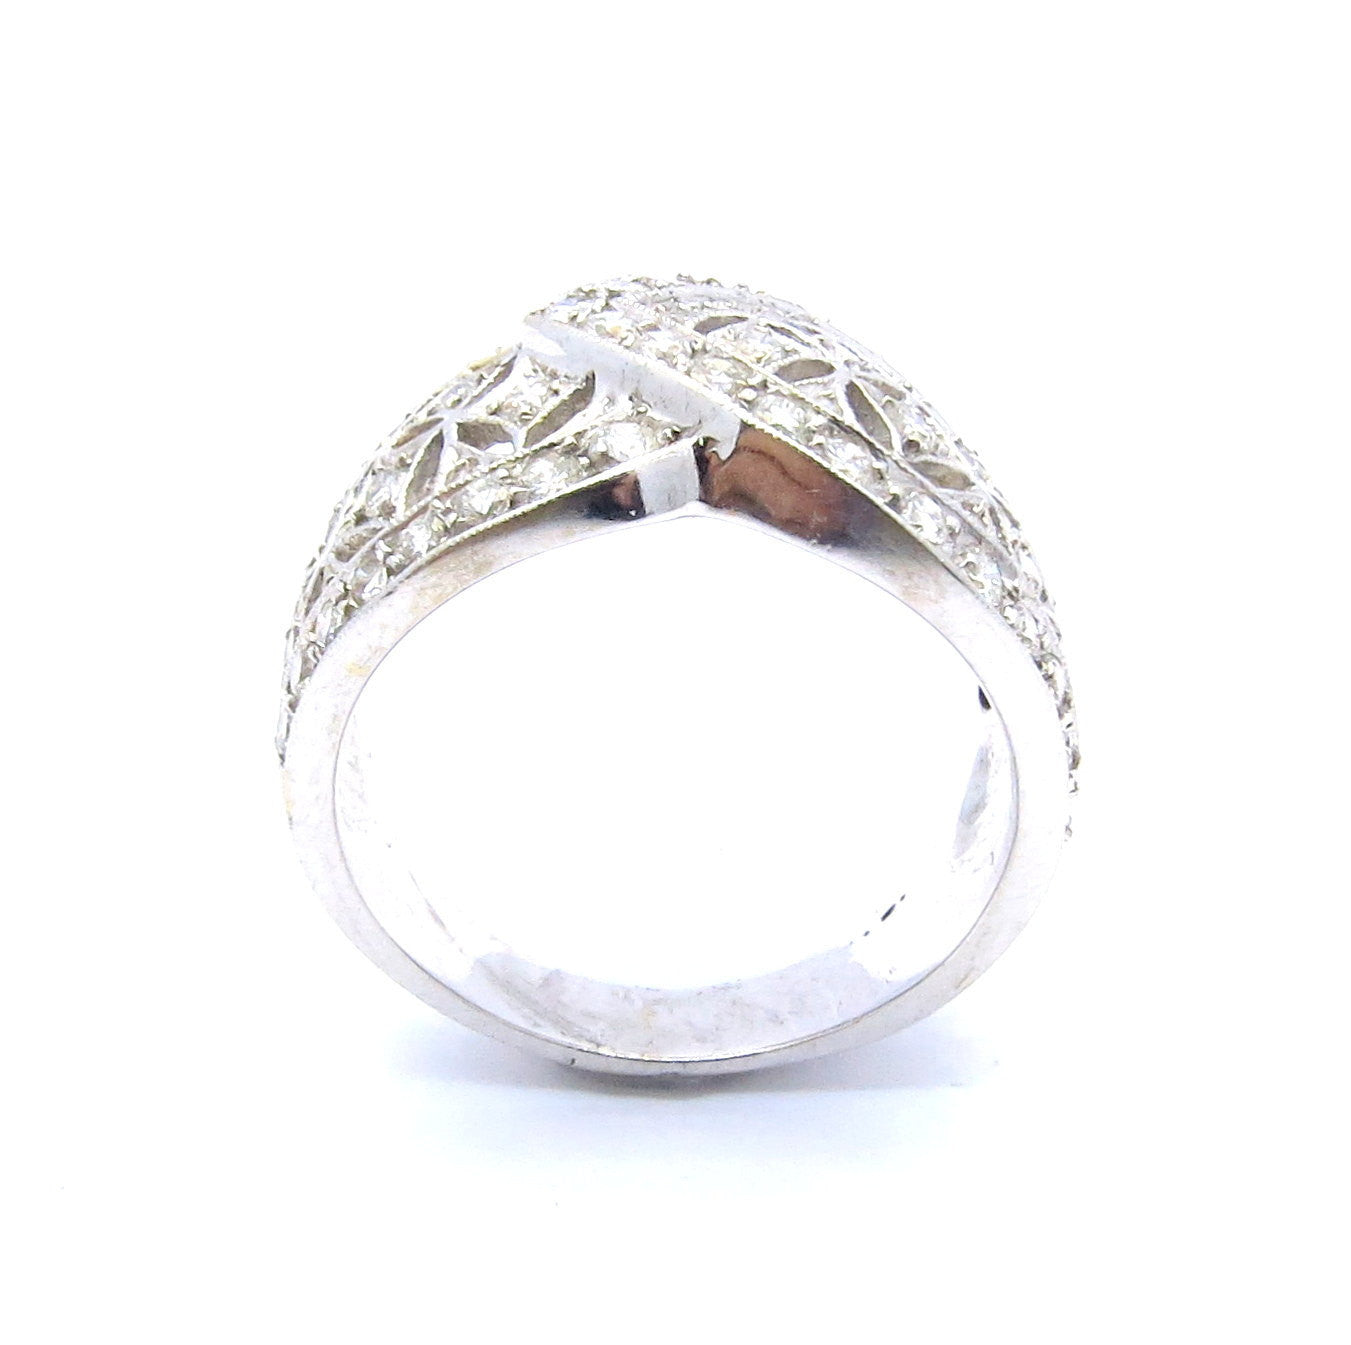 Wide Band Diamond Wedding Band, Cocktail Ring, Anniversary Ring